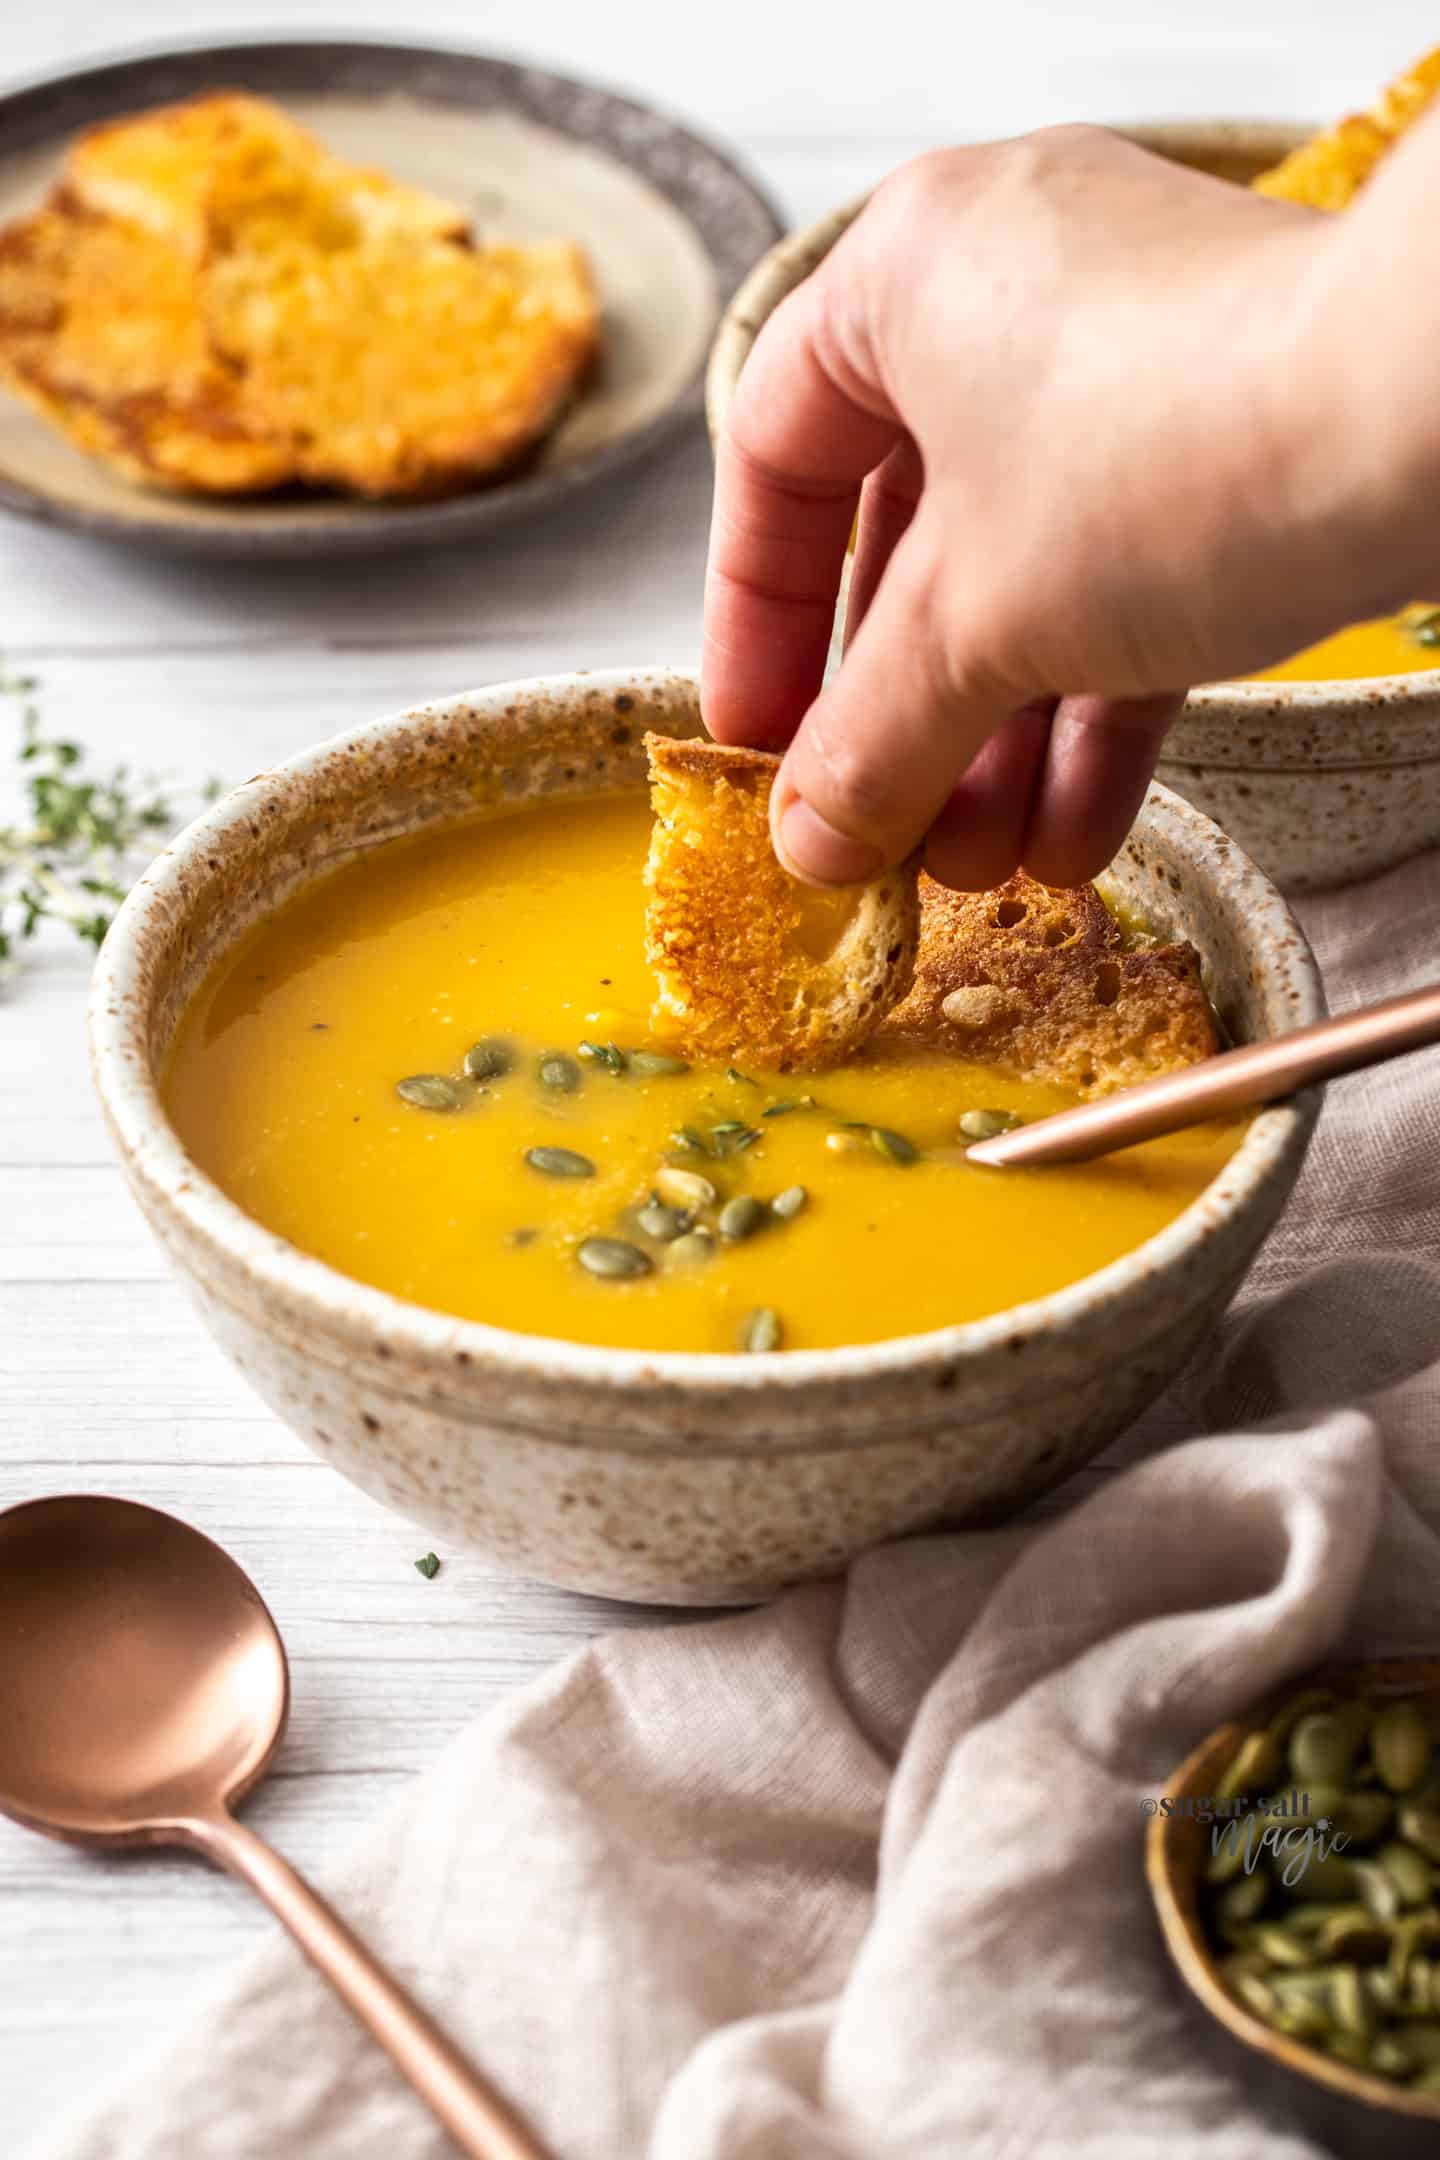 A hand dipping a piece of bread into a bowl of butternut soup.